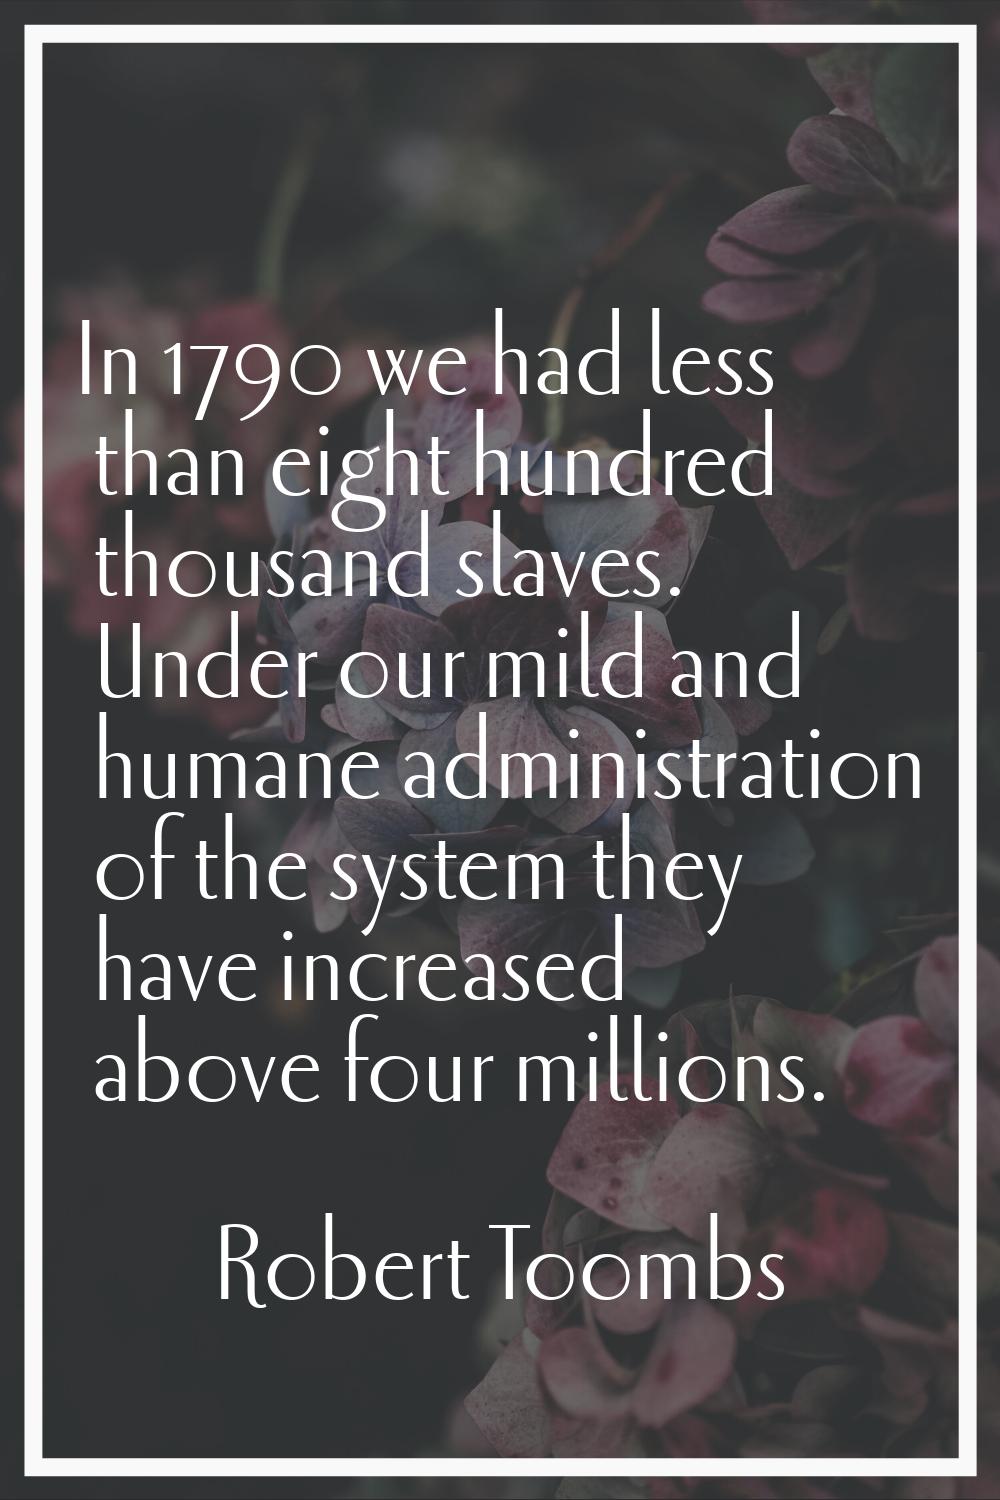 In 1790 we had less than eight hundred thousand slaves. Under our mild and humane administration of